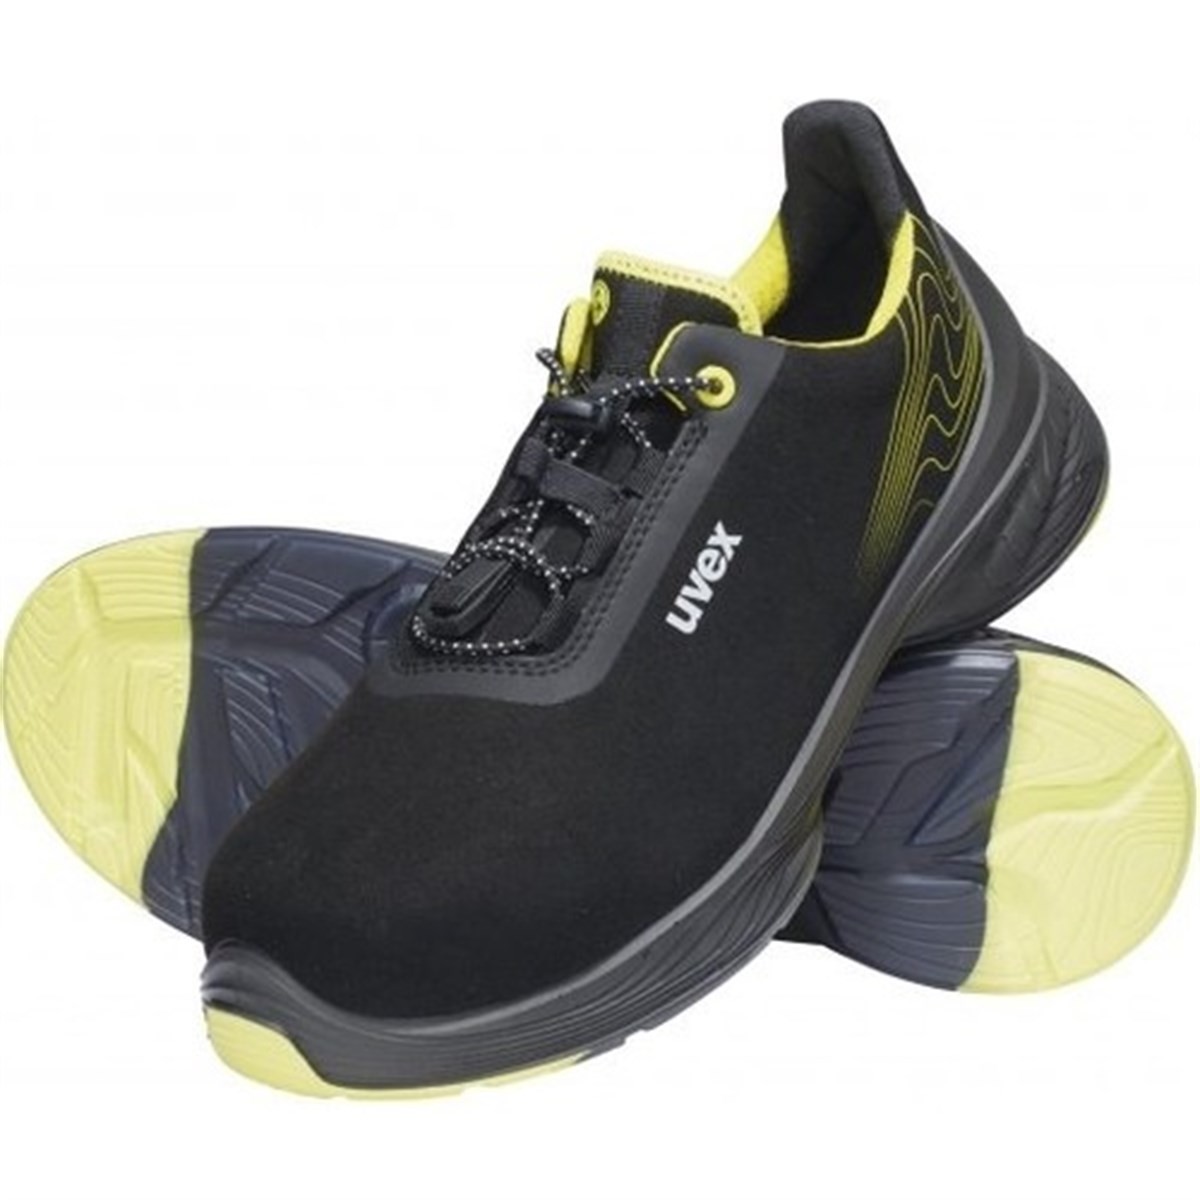 UVEX 6844 SRC ESD S2 G2 SAFETY SHOES